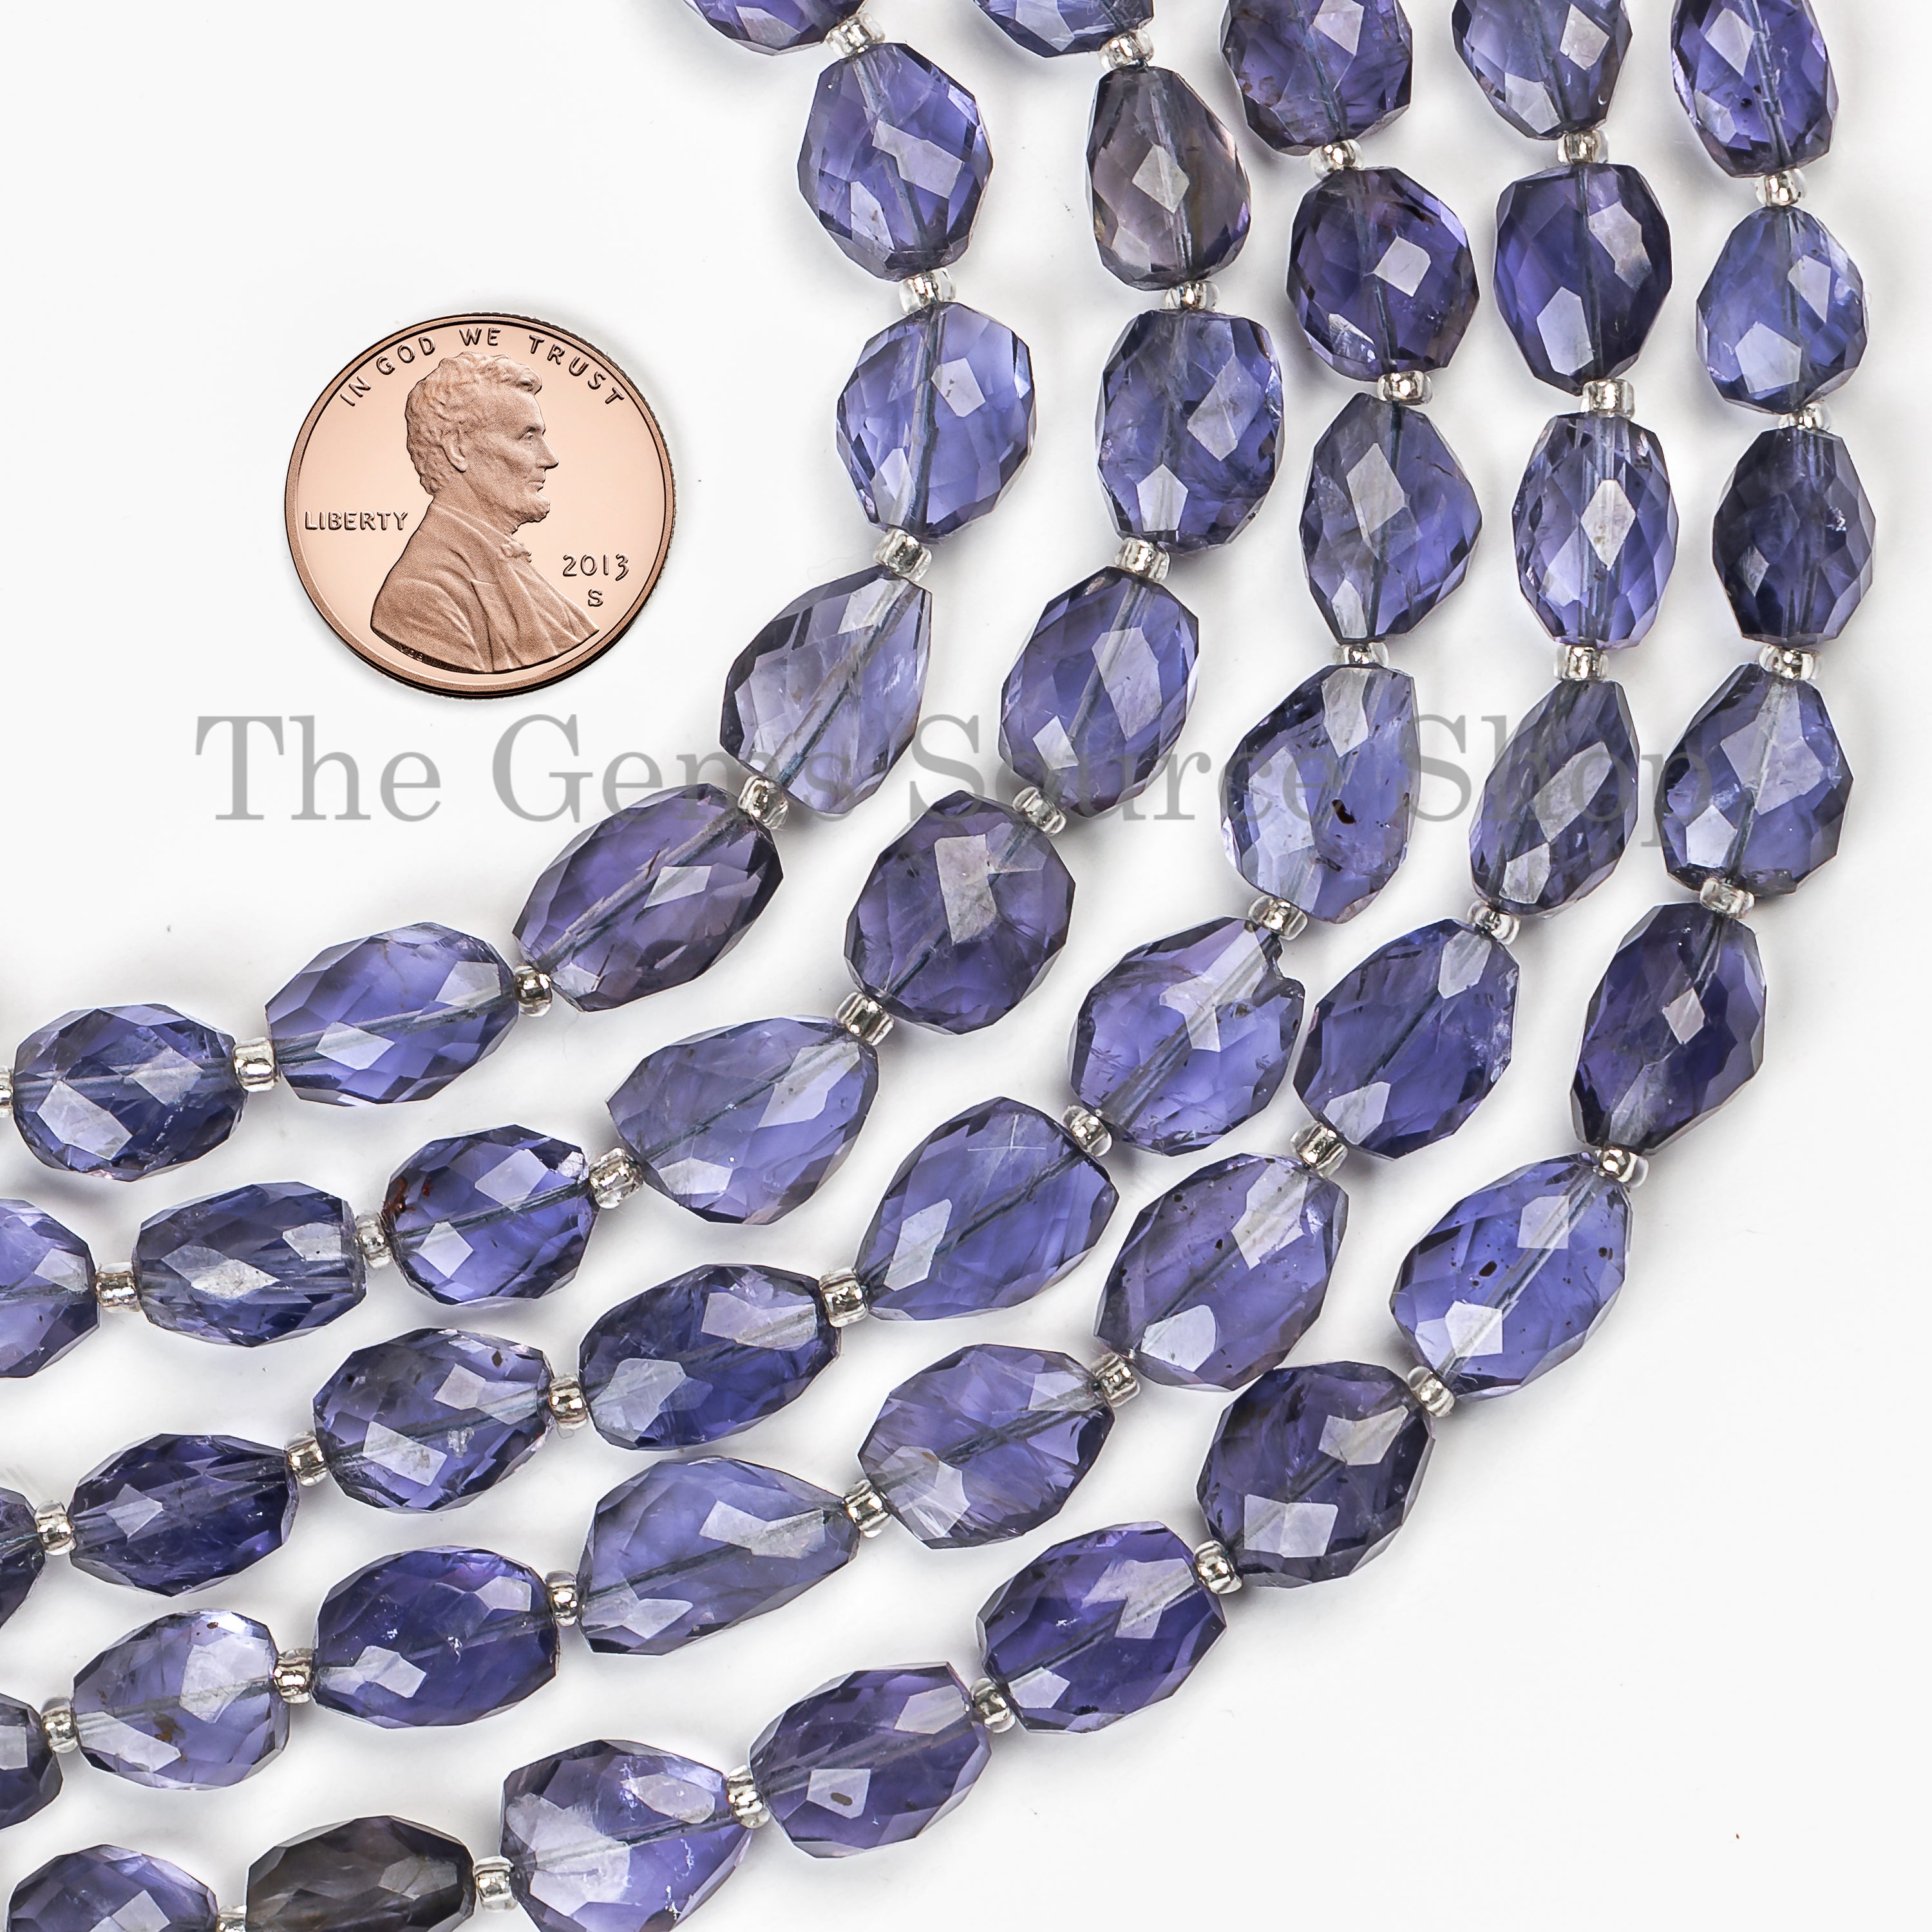 Iolite Faceted Nugget Beads, Iolite Fancy Nugget Beads, Wholesale Gemstone Beads